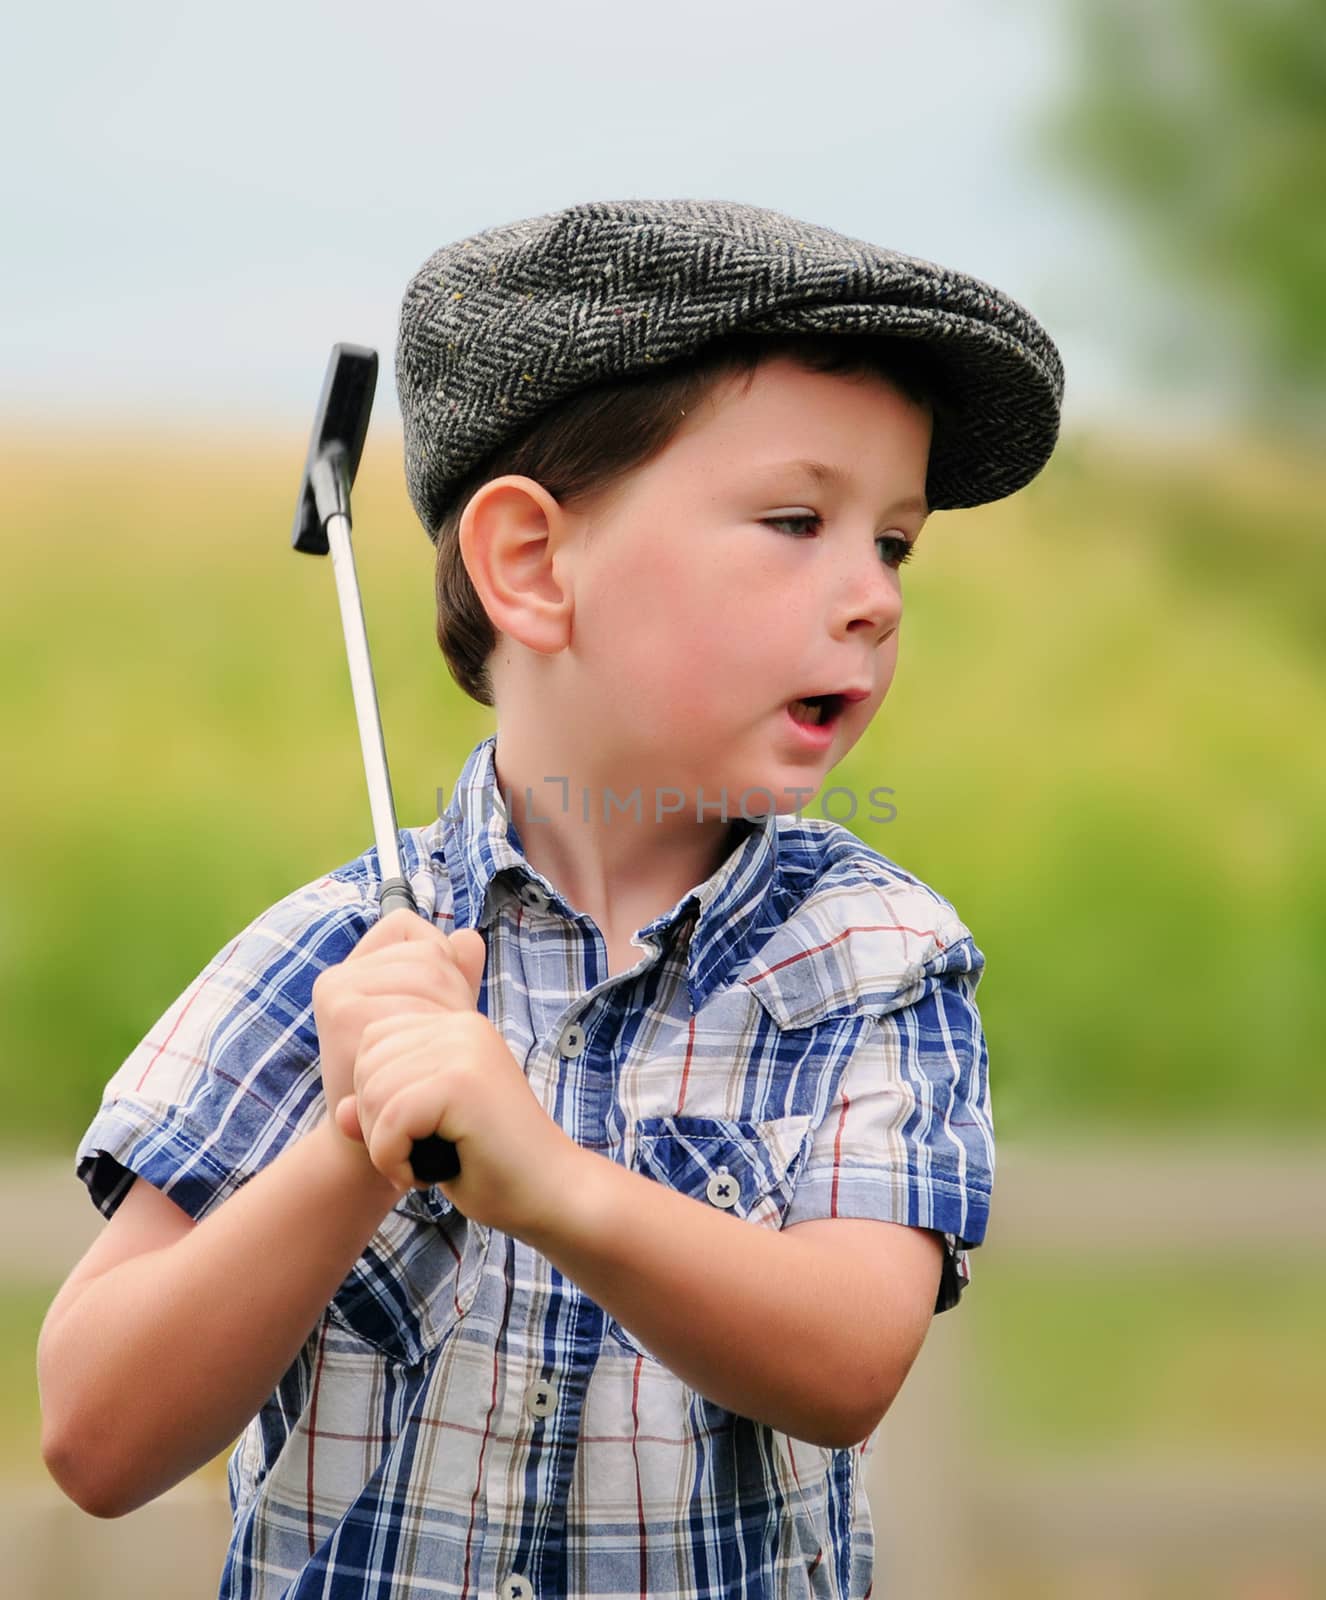 Cute little boy in a driving hat playing with a golf club